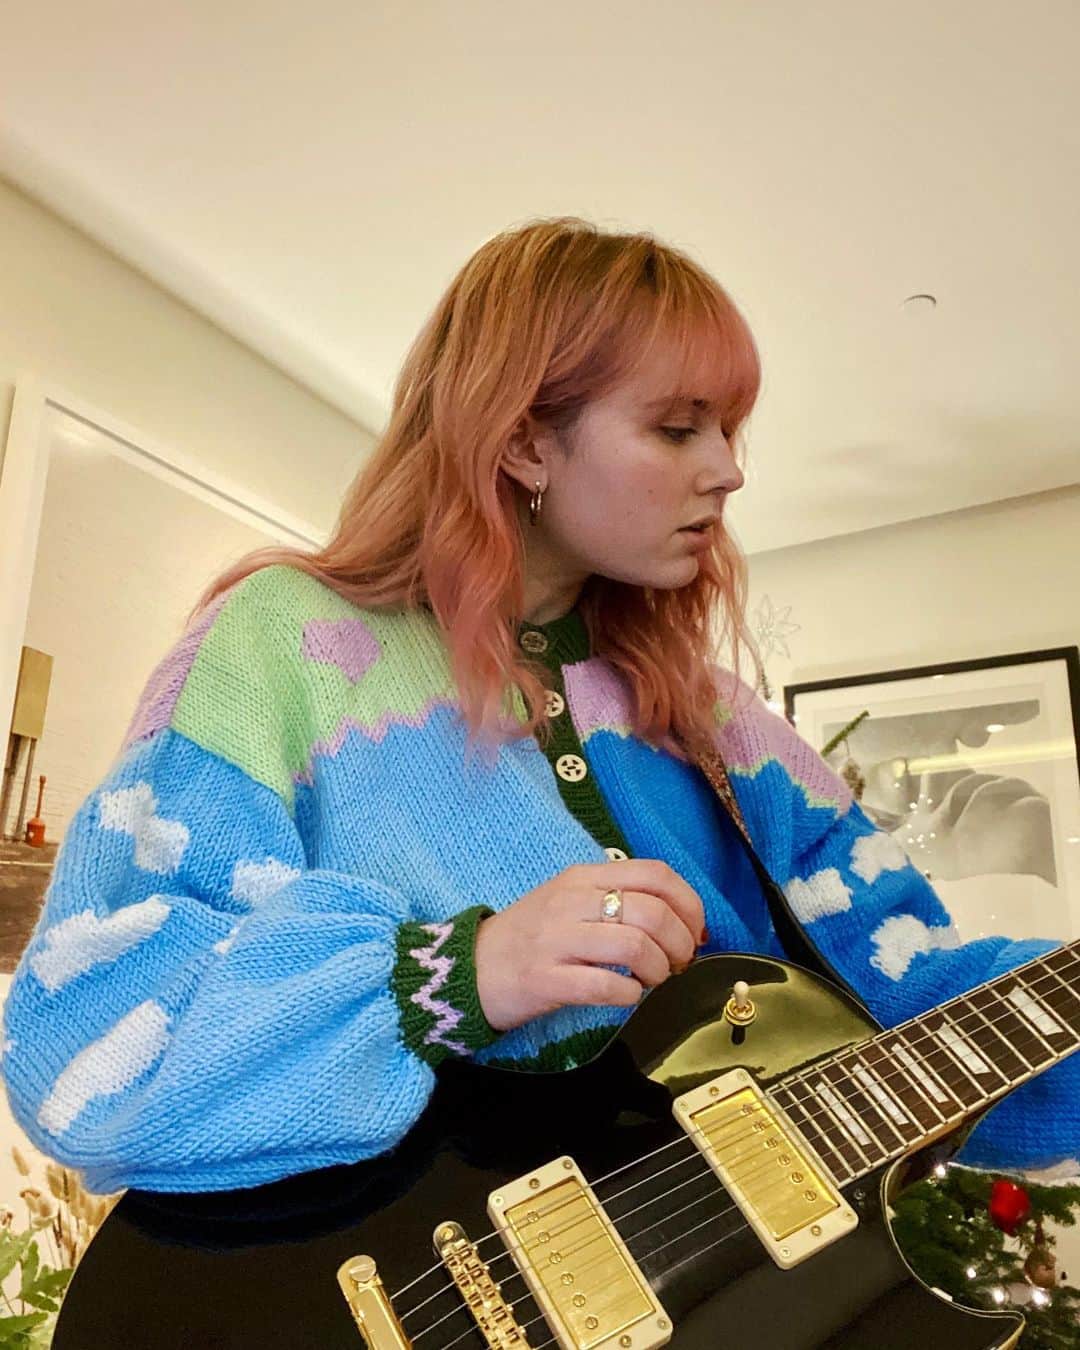 Arden Roseのインスタグラム：「Looks like I’m rockin around the Christmas tree this year AMIRITE hah! Haaaaaahaha! (I was one of the idiots that decided to try and pick up guitar during quarantine and I’m proud to tell you that I’ve just graduated to level two which basically means I know what the G chord is lol) also thanks for the cute sweater @hanthiis 😘」